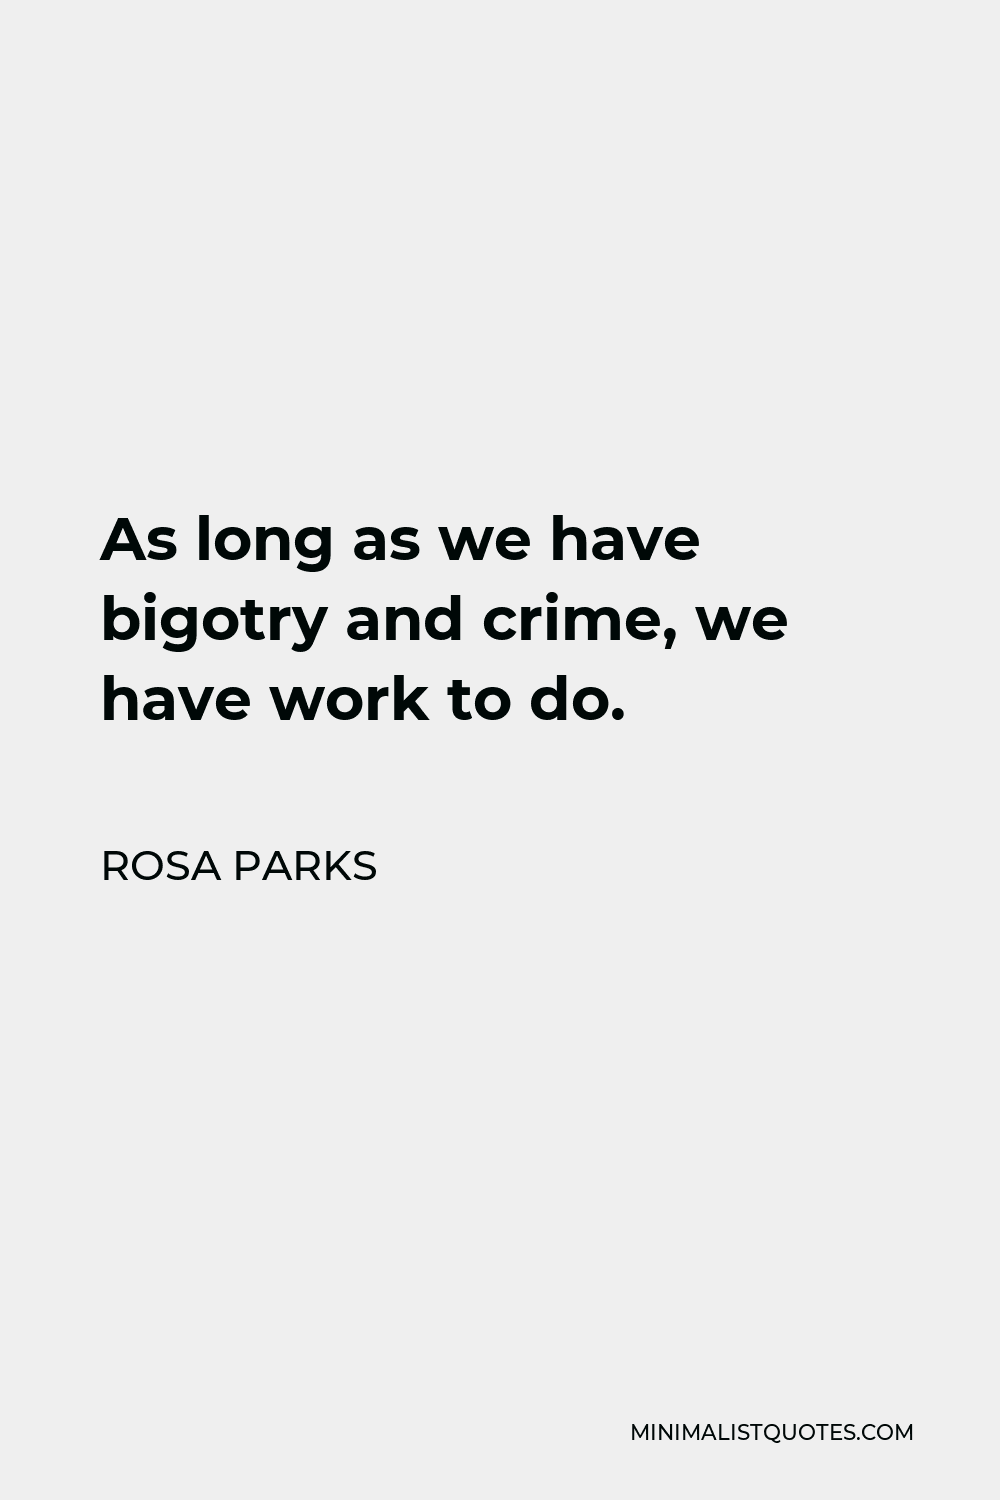 Rosa Parks Quote - As long as we have bigotry and crime, we have work to do.